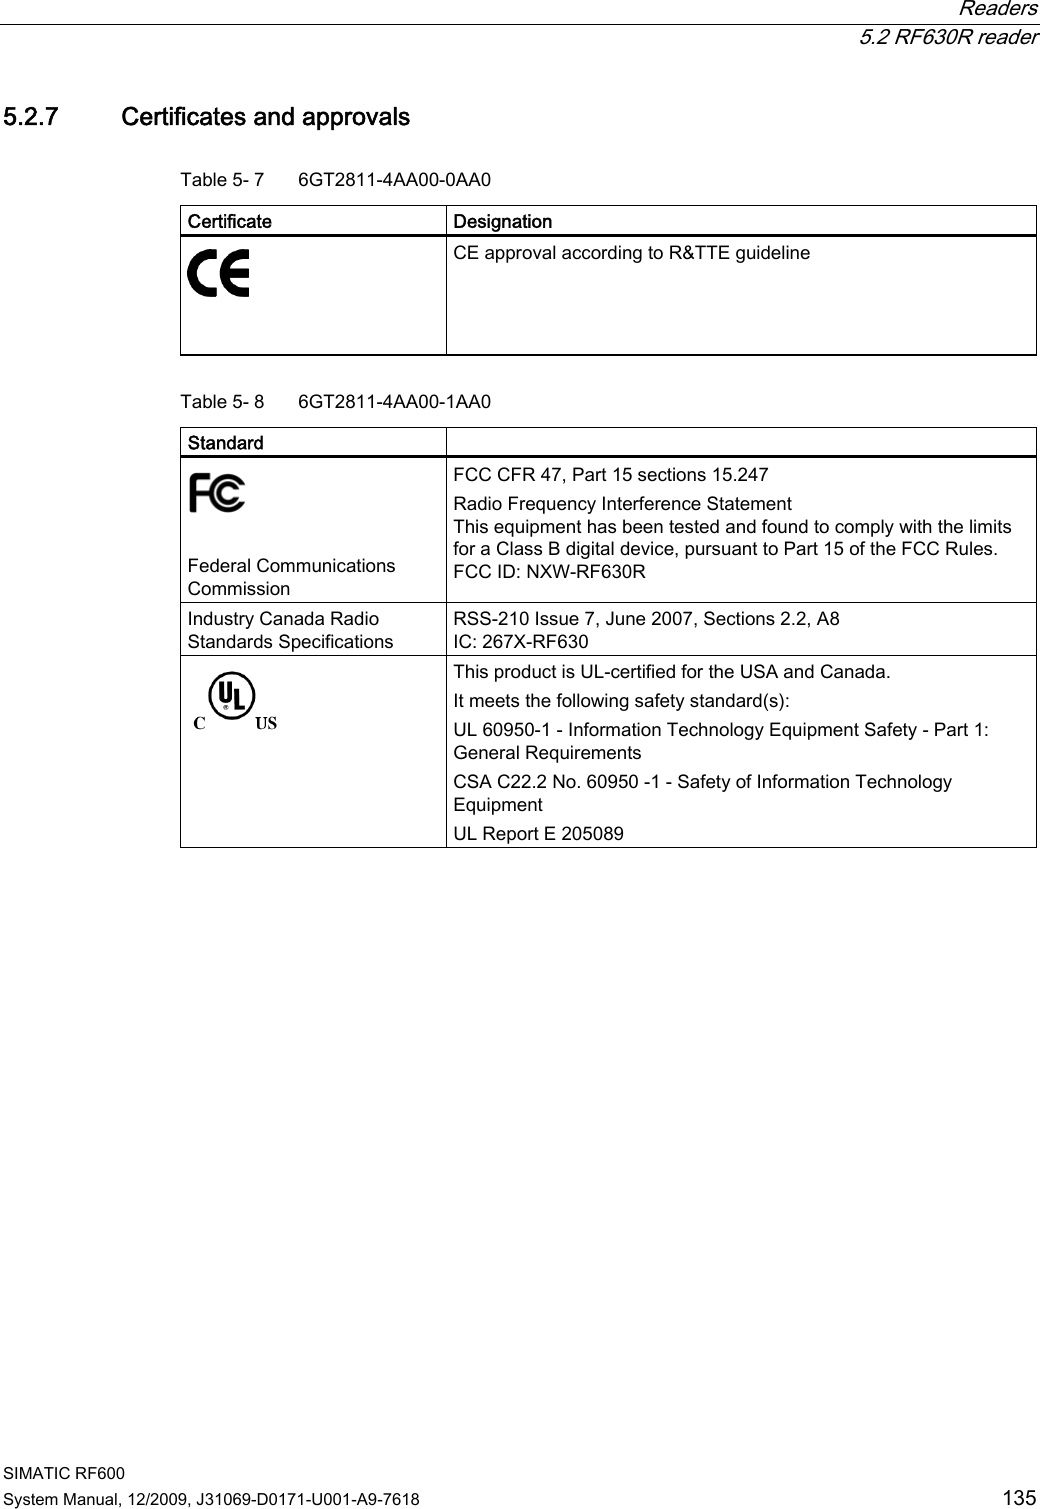  Readers  5.2 RF630R reader SIMATIC RF600 System Manual, 12/2009, J31069-D0171-U001-A9-7618  135 5.2.7 Certificates and approvals Table 5- 7  6GT2811-4AA00-0AA0 Certificate  Designation    CE approval according to R&amp;TTE guideline Table 5- 8  6GT2811-4AA00-1AA0 Standard     Federal Communications Commission  FCC CFR 47, Part 15 sections 15.247 Radio Frequency Interference Statement  This equipment has been tested and found to comply with the limits for a Class B digital device, pursuant to Part 15 of the FCC Rules.  FCC ID: NXW-RF630R Industry Canada Radio Standards Specifications RSS-210 Issue 7, June 2007, Sections 2.2, A8 IC: 267X-RF630  This product is UL-certified for the USA and Canada. It meets the following safety standard(s):  UL 60950-1 - Information Technology Equipment Safety - Part 1: General Requirements CSA C22.2 No. 60950 -1 - Safety of Information Technology Equipment UL Report E 205089 